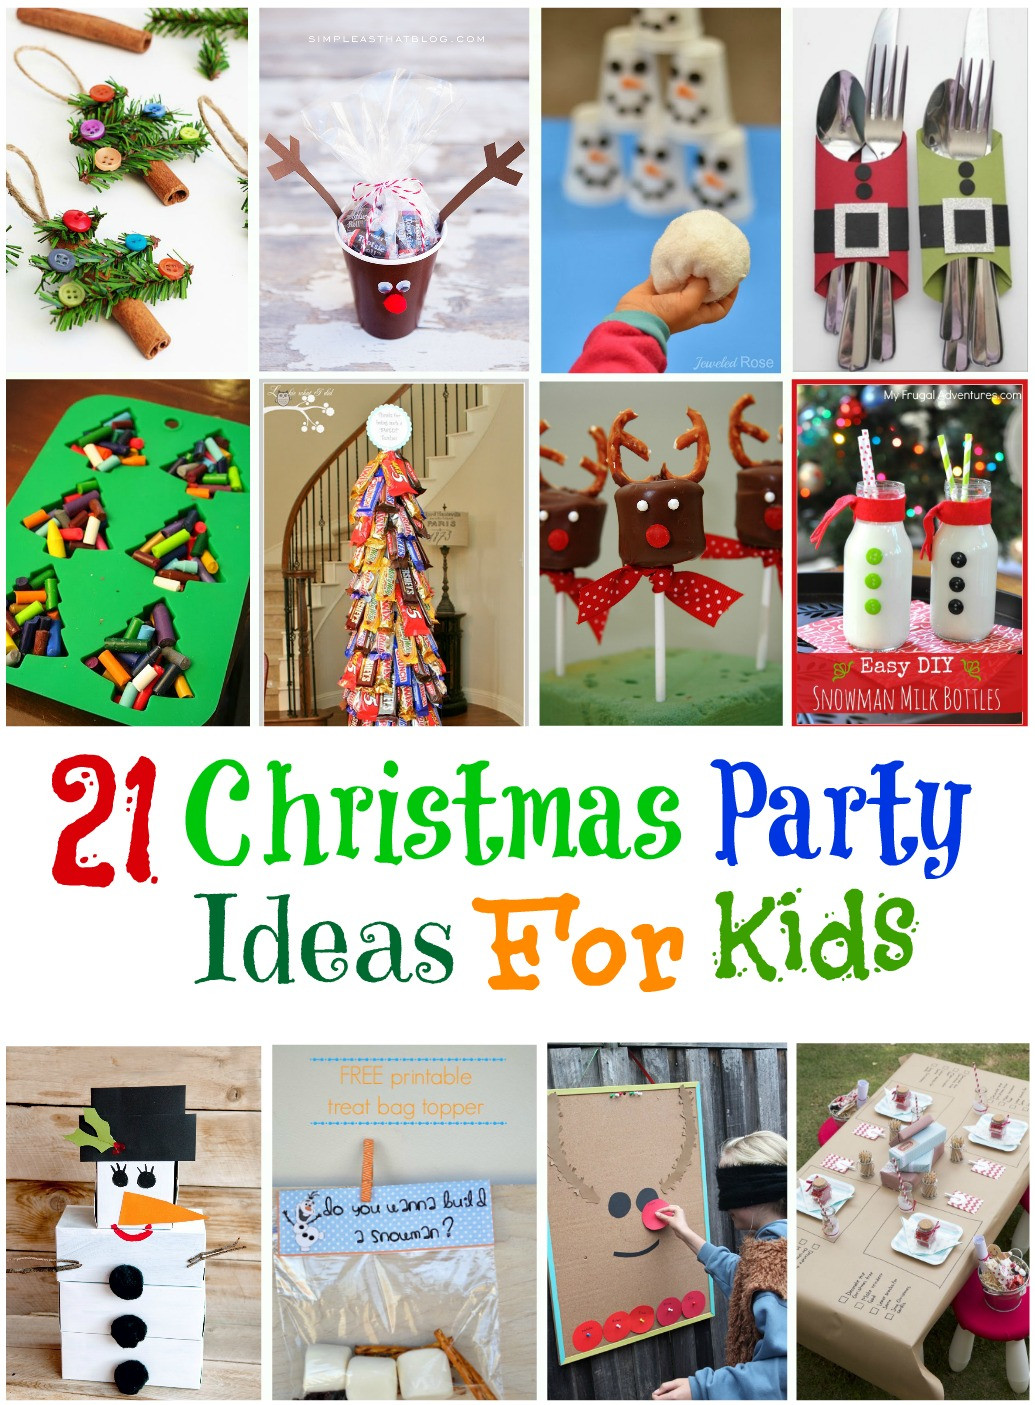 Christmas Party Ideas For Kids
 20 Frozen Birthday Party Ideas